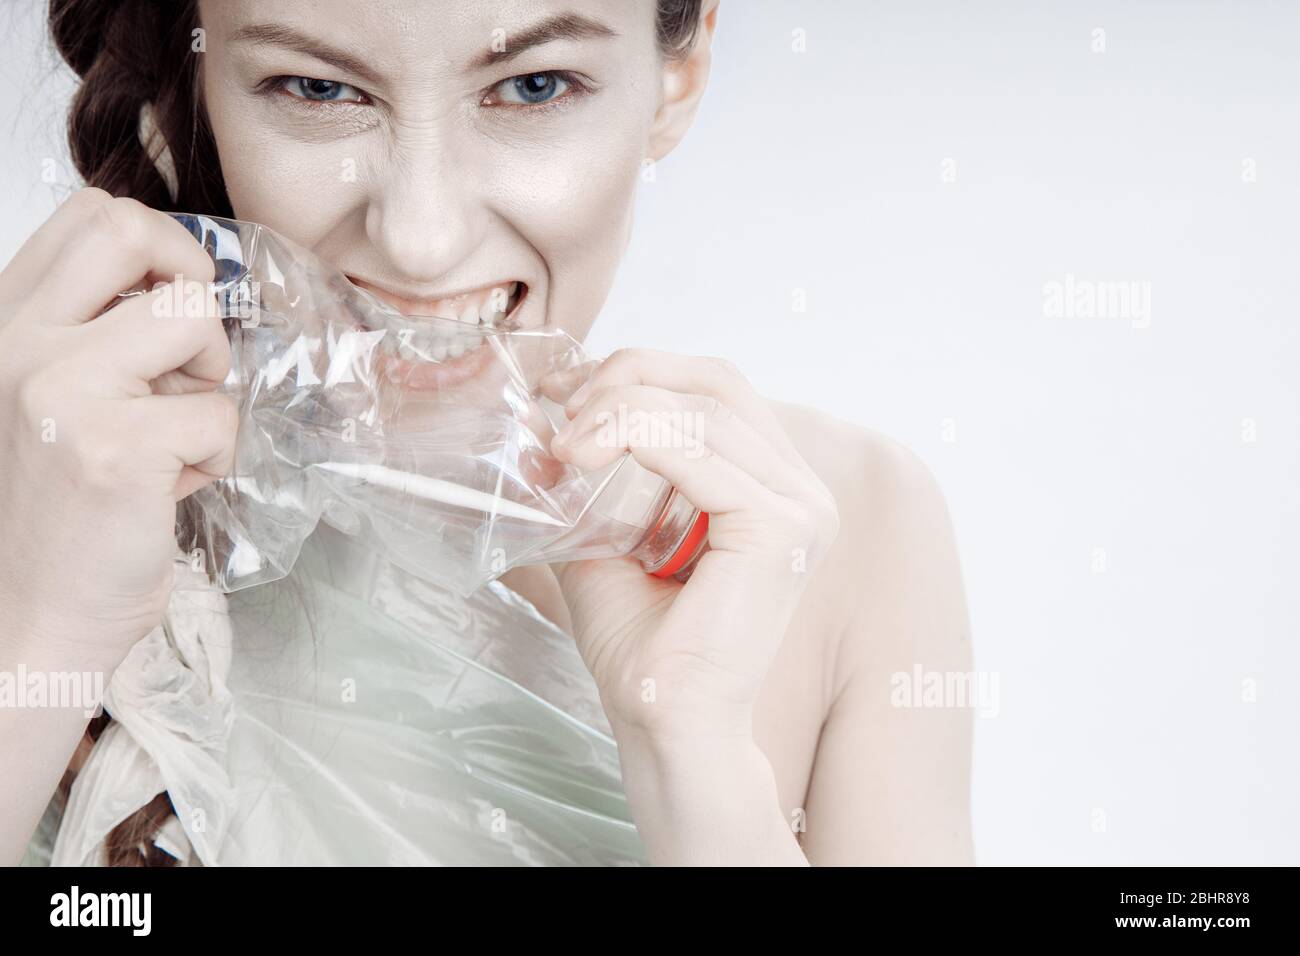 The girl tries to break the plastic bottle with her teeth and hands. The girl's gender aggressively bares its teeth. Stock Photo